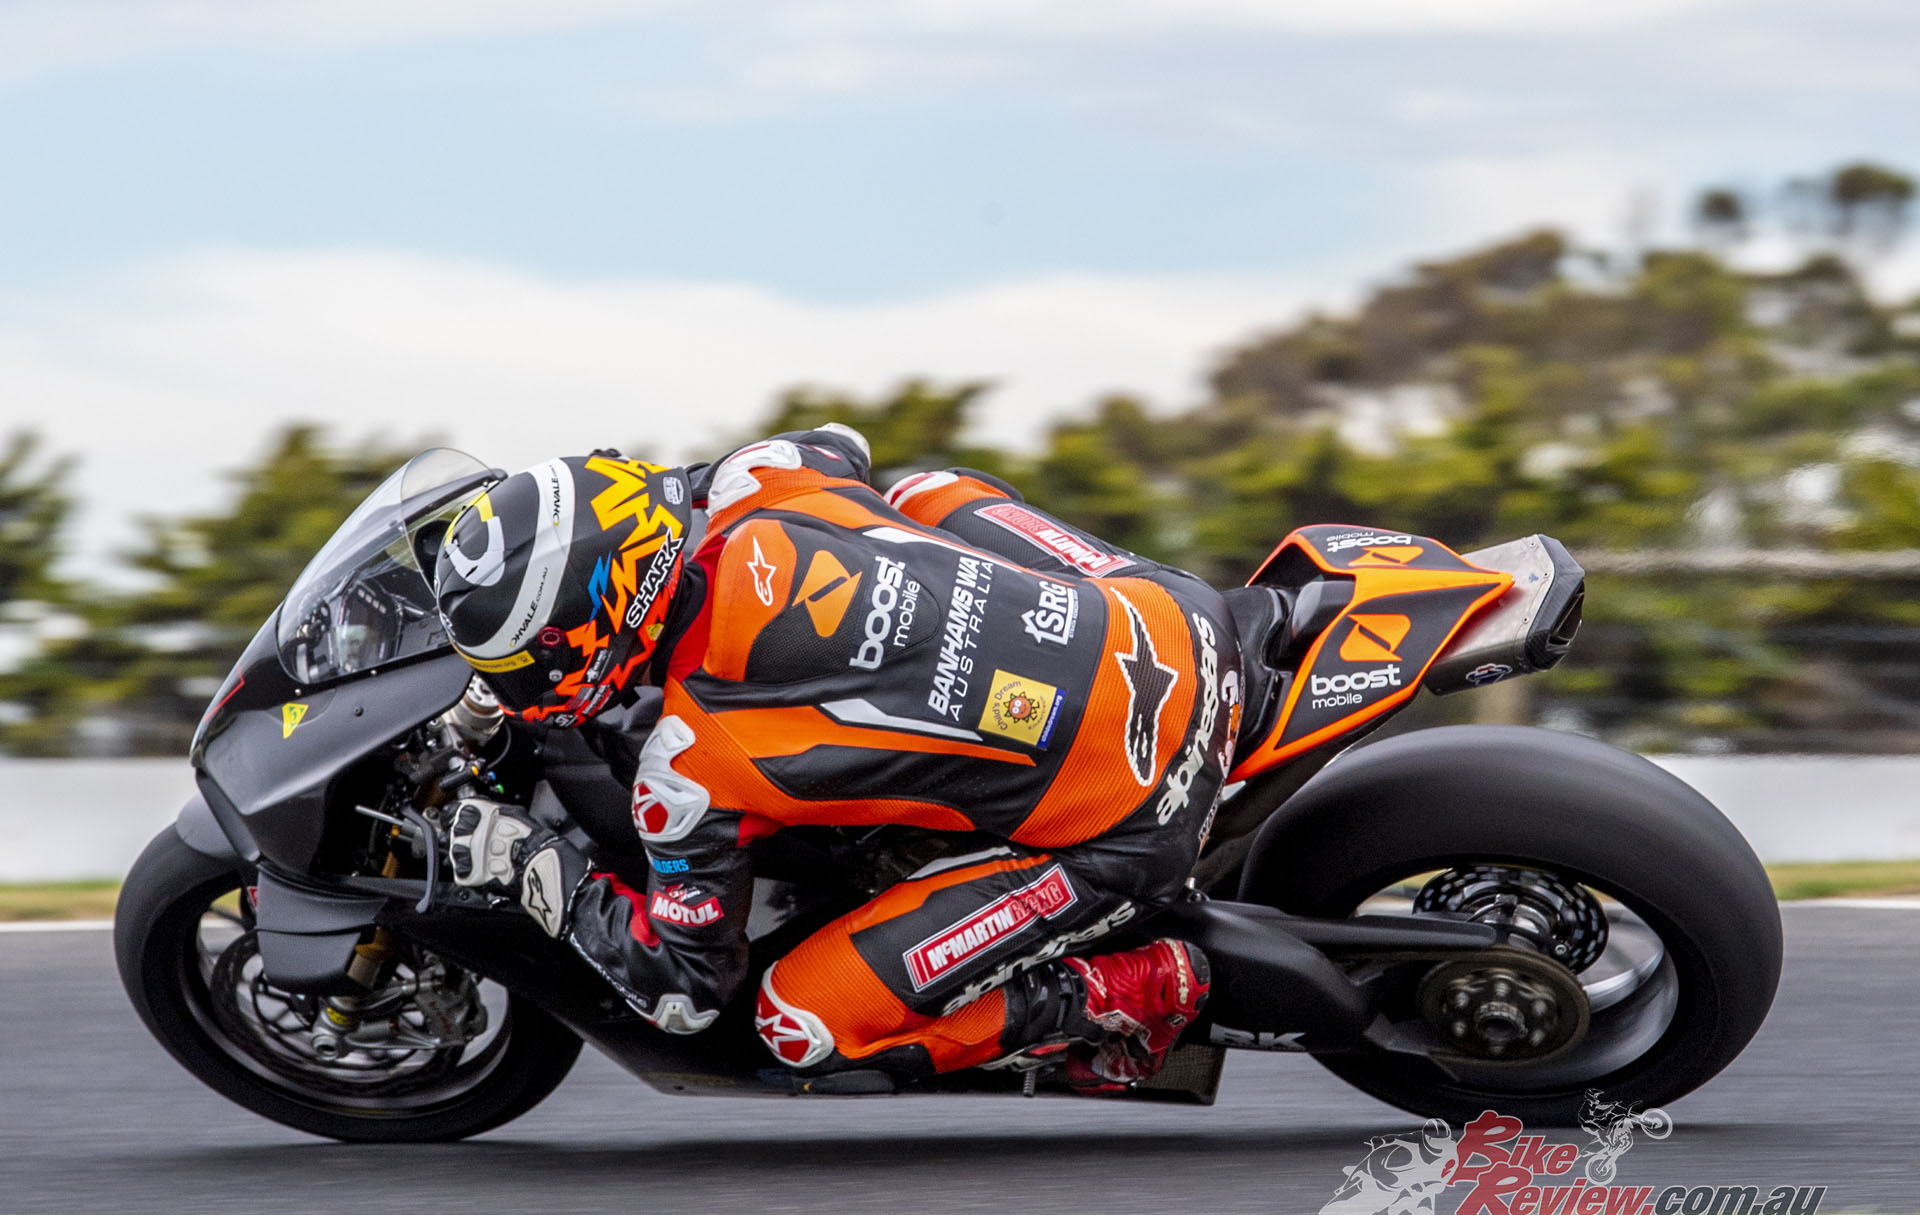 Most of the major players were in attendance, with all eyes were on 2020-21 Superbike Champion, Wayne Maxwell, who came out of attempted retirement to attempt to net another title in 2022.